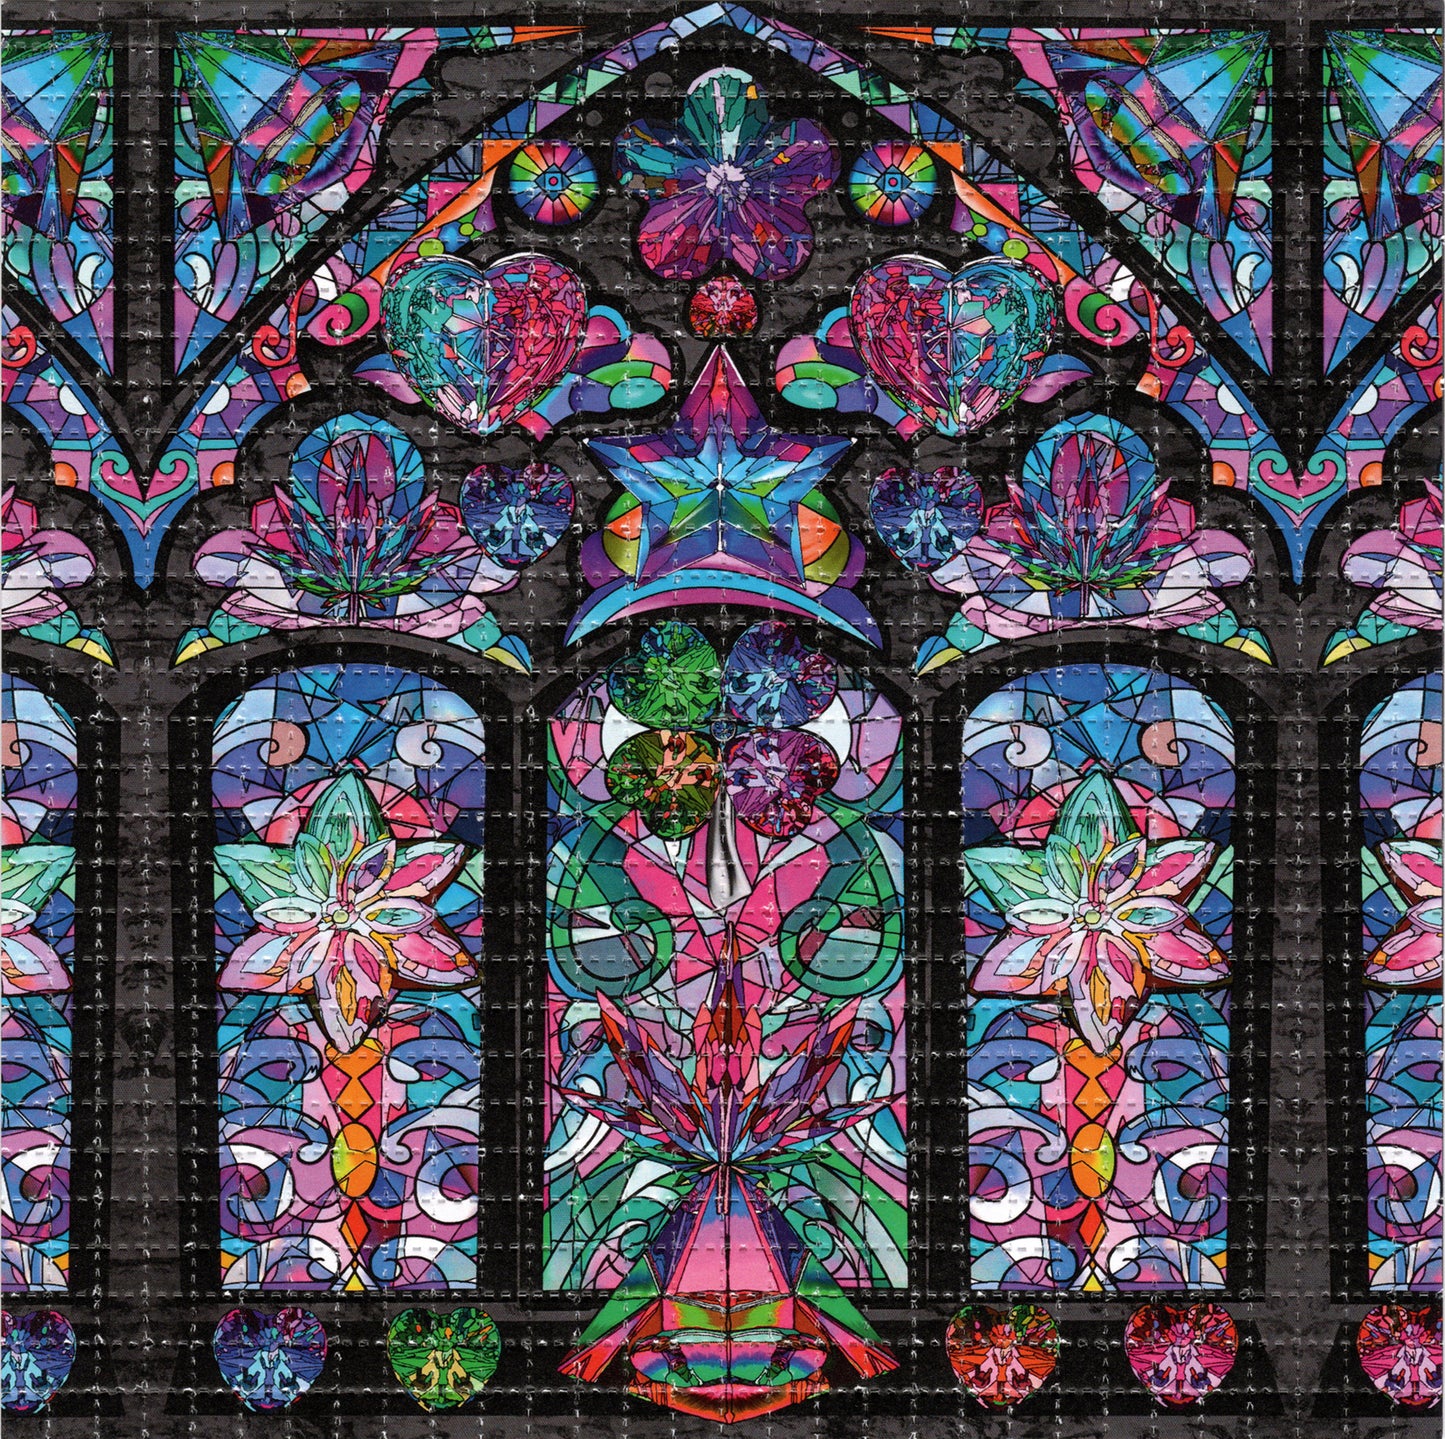 Neon Cathedral by Ellie Paisley Brooks Signed Limited Edition LSD blotter art print